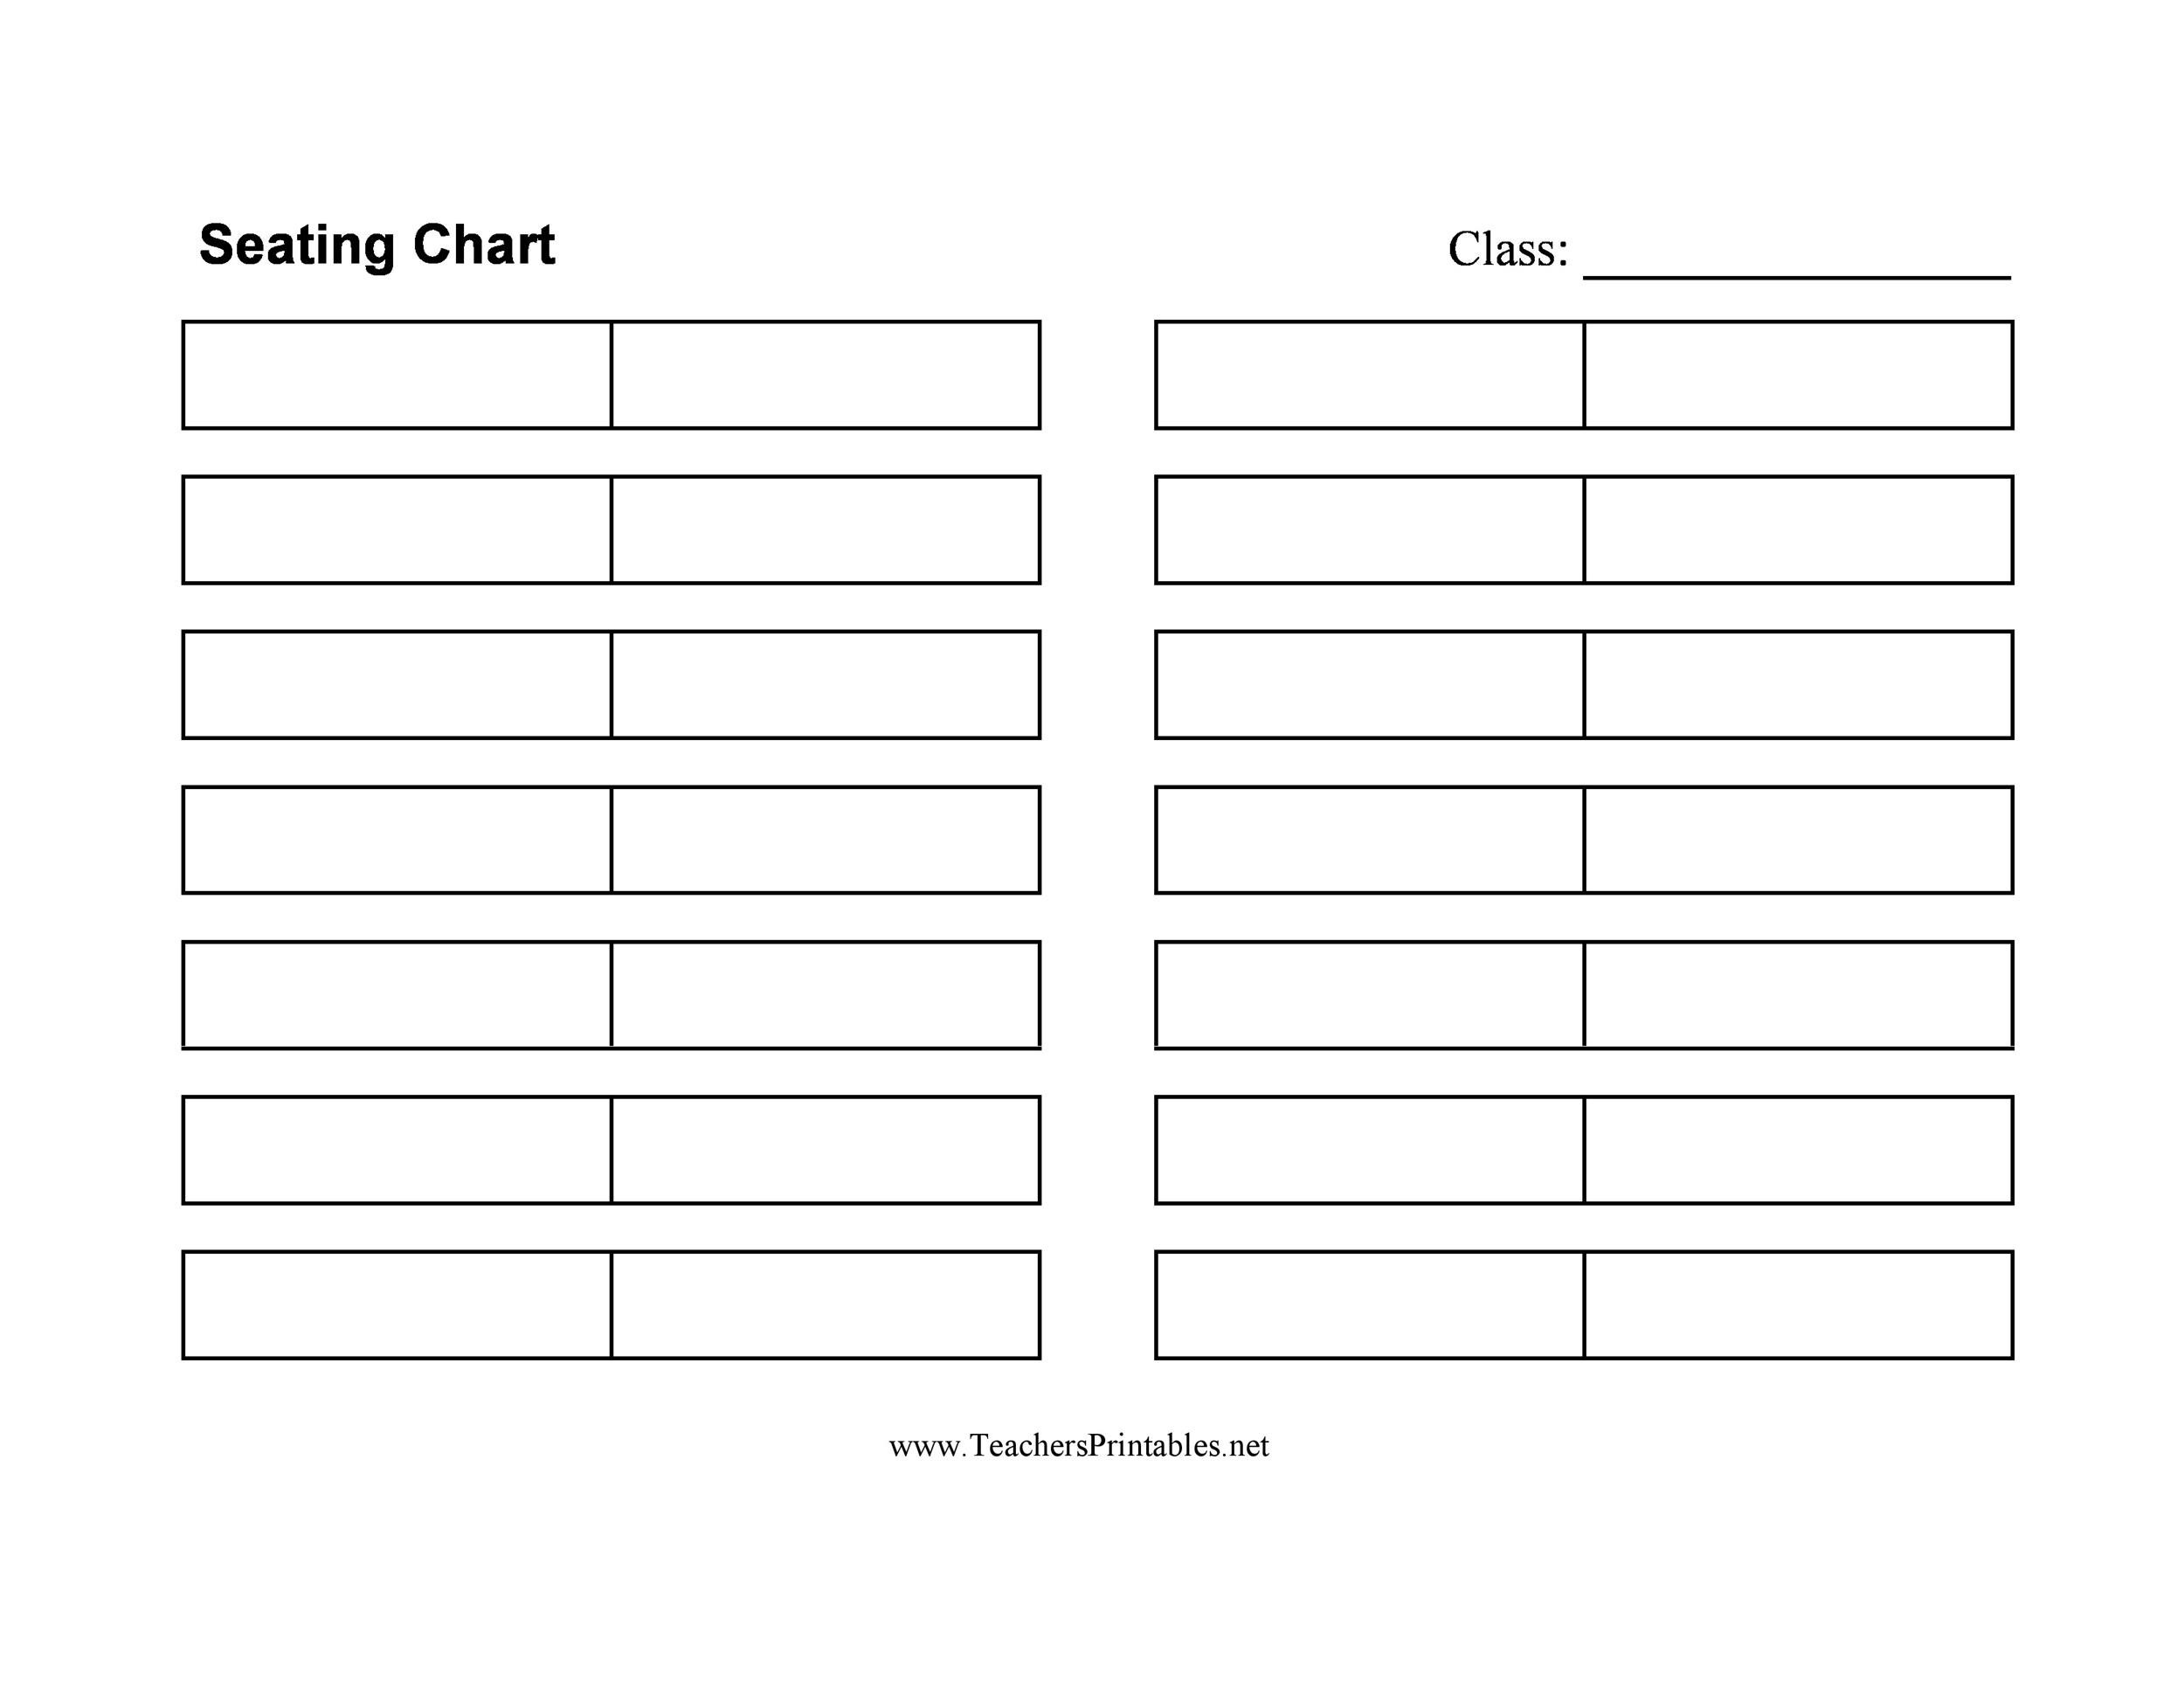 classic-seating-chart-cards-template-elegant-seating-cards-etsy-seating-cards-bridal-shower